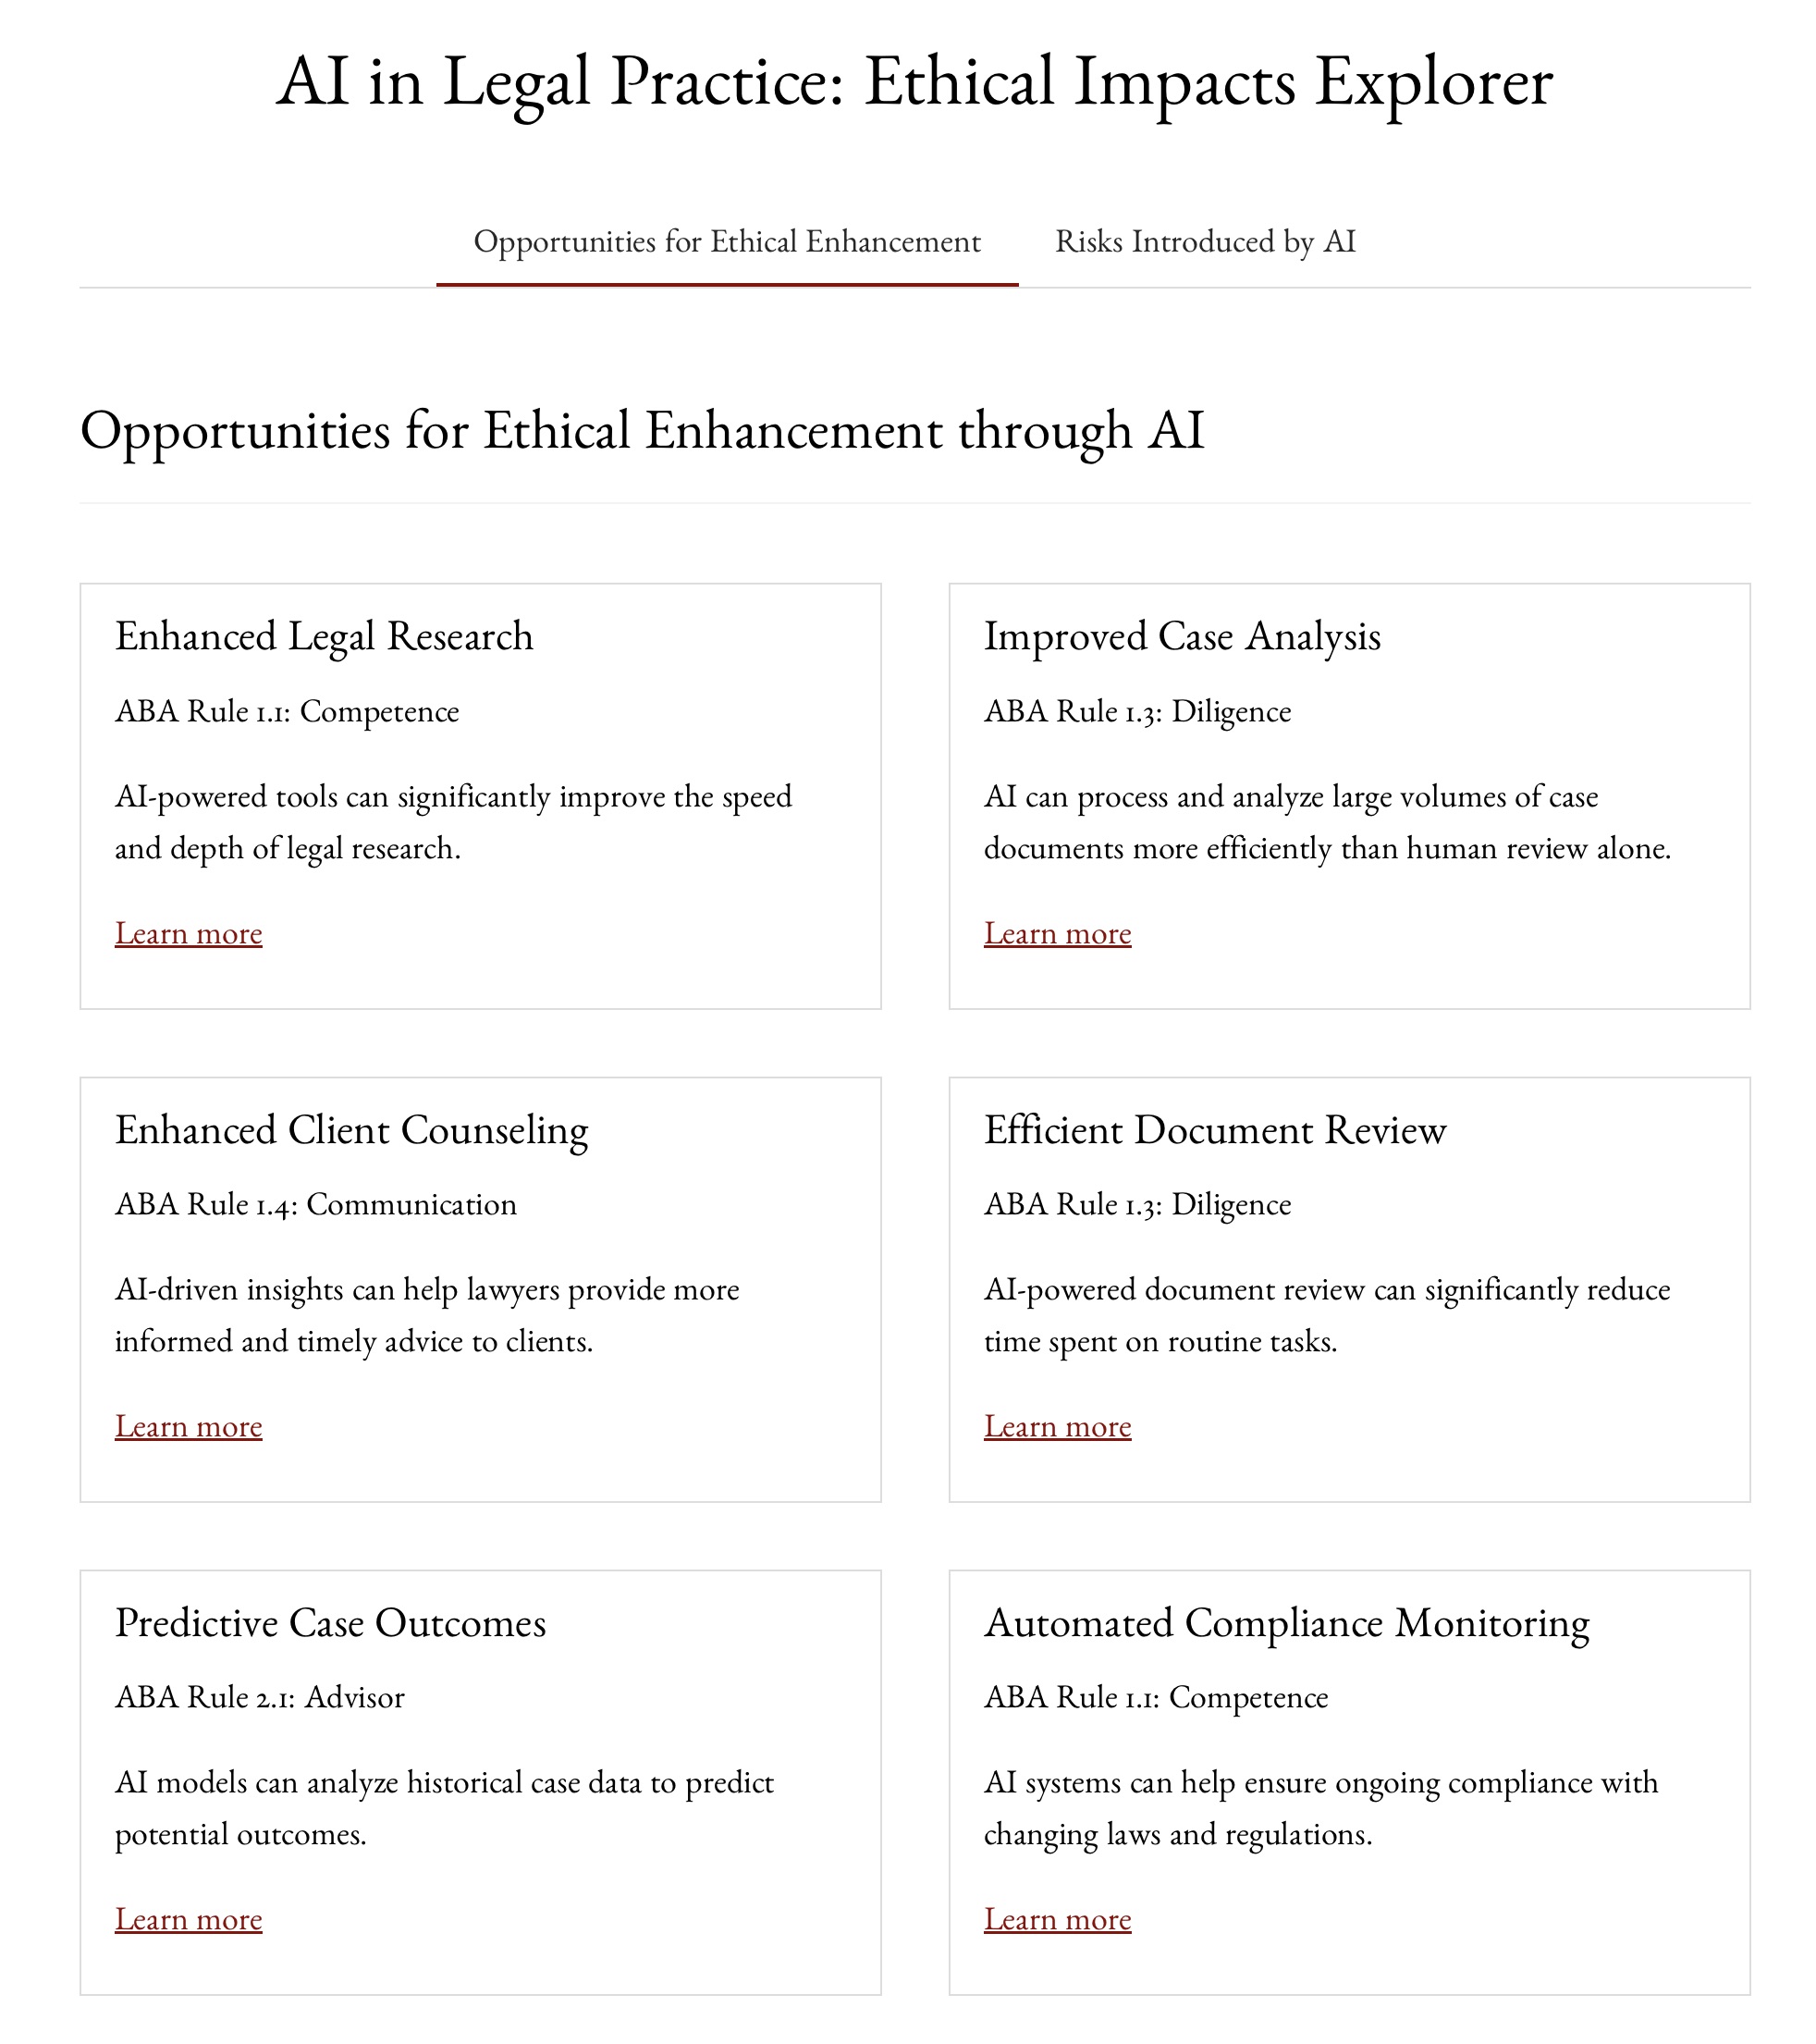 AI in Legal Practice: Ethical Impacts Explorer